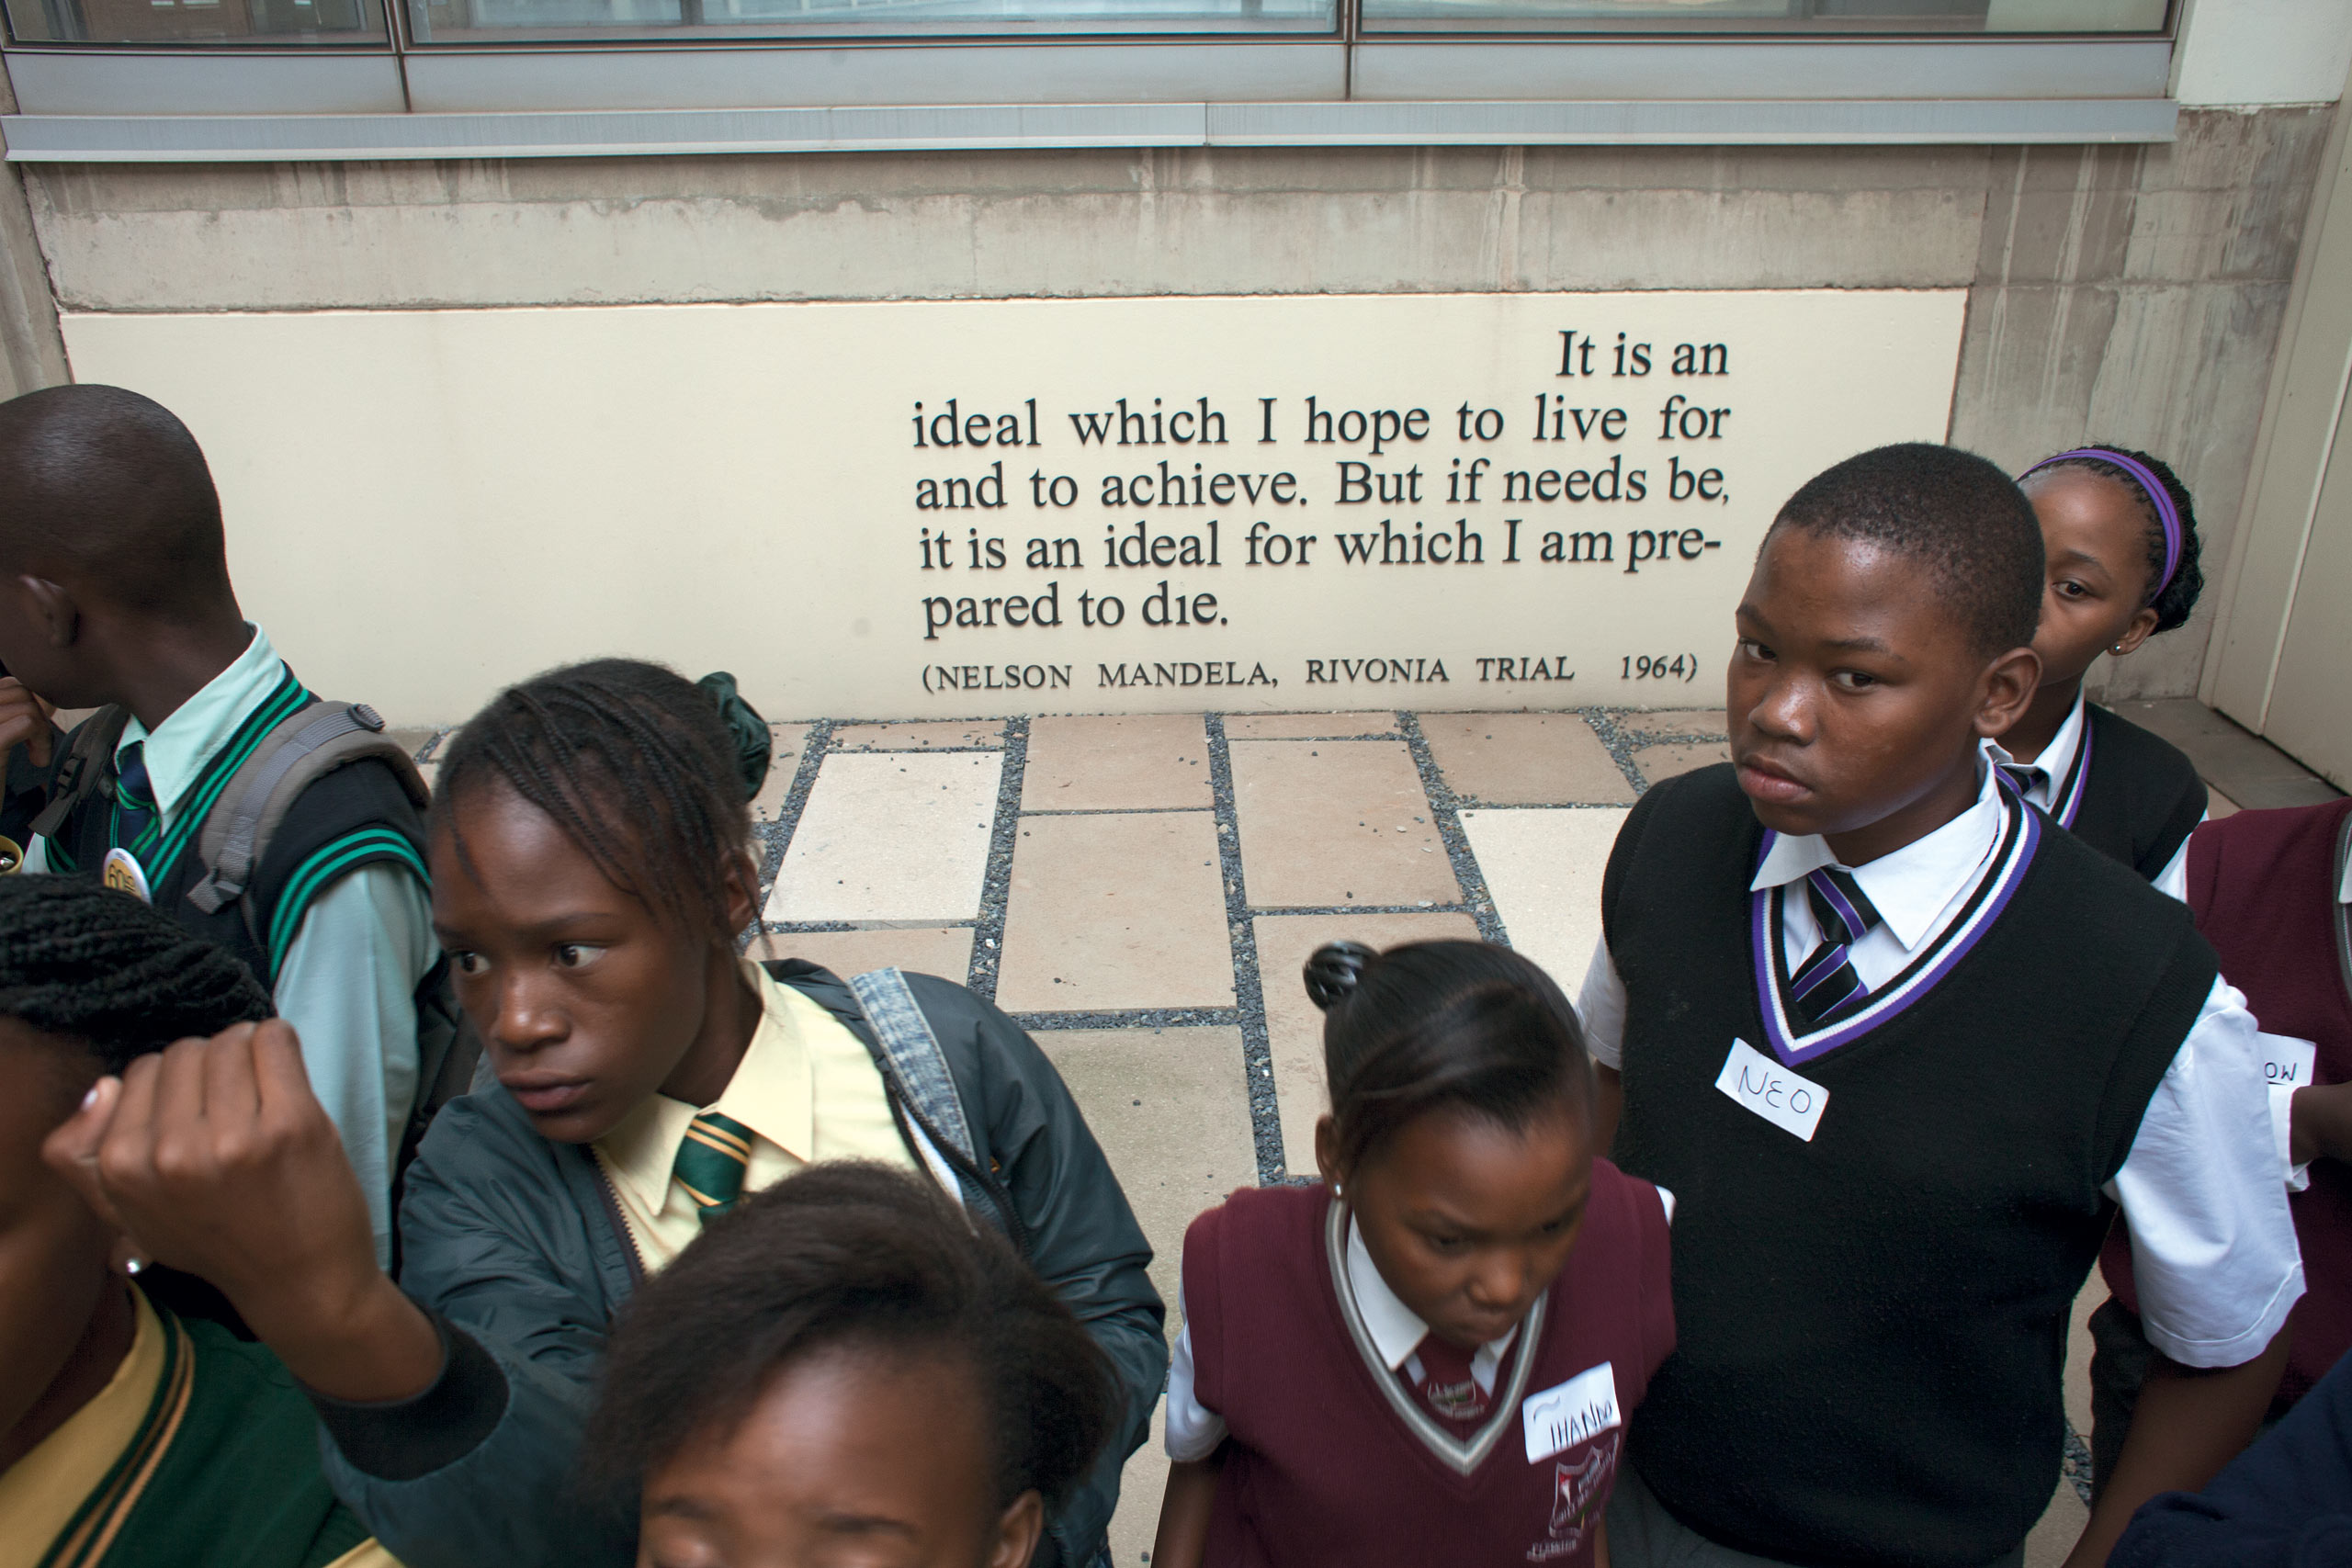 Students in an outreach program visit the new Constitutional Court at Constitution Hill, in South Africa. Adjacent to the new Constitutional Court, where before was Johannesburg’s reviled prison Old Fort, is now an apartheid memorial, built with the contribution of Atlantic.